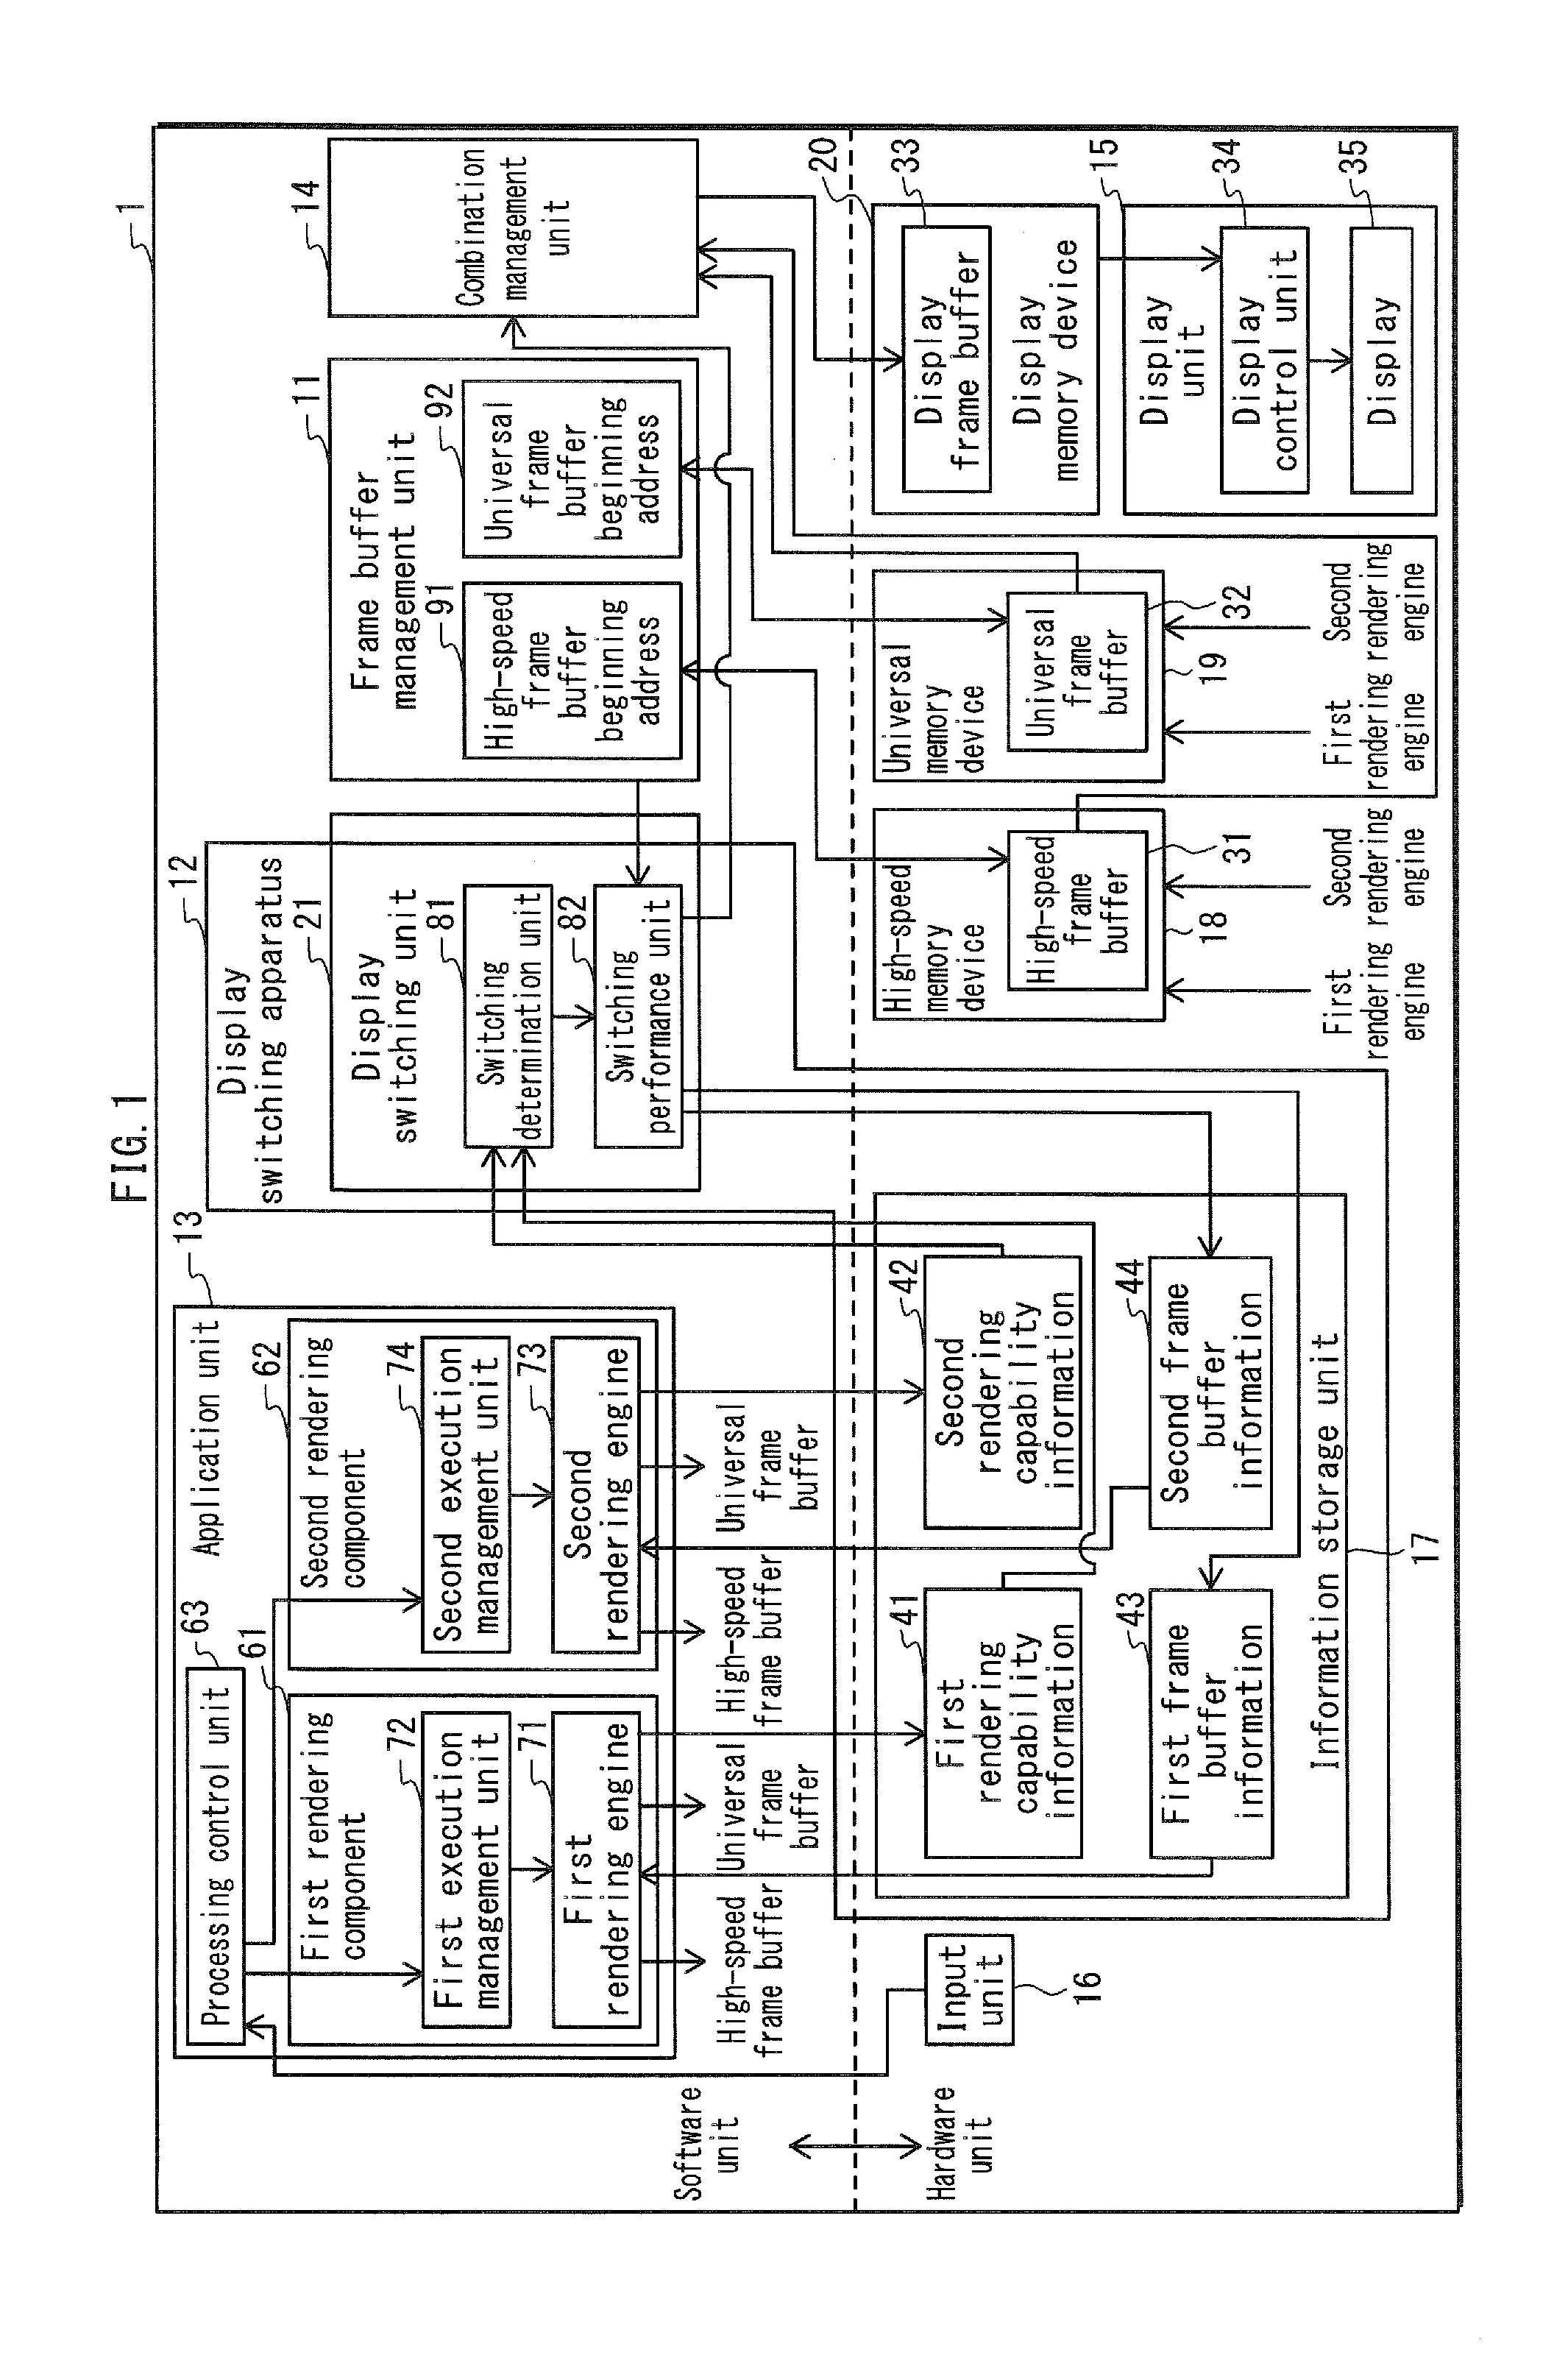 Display switching device